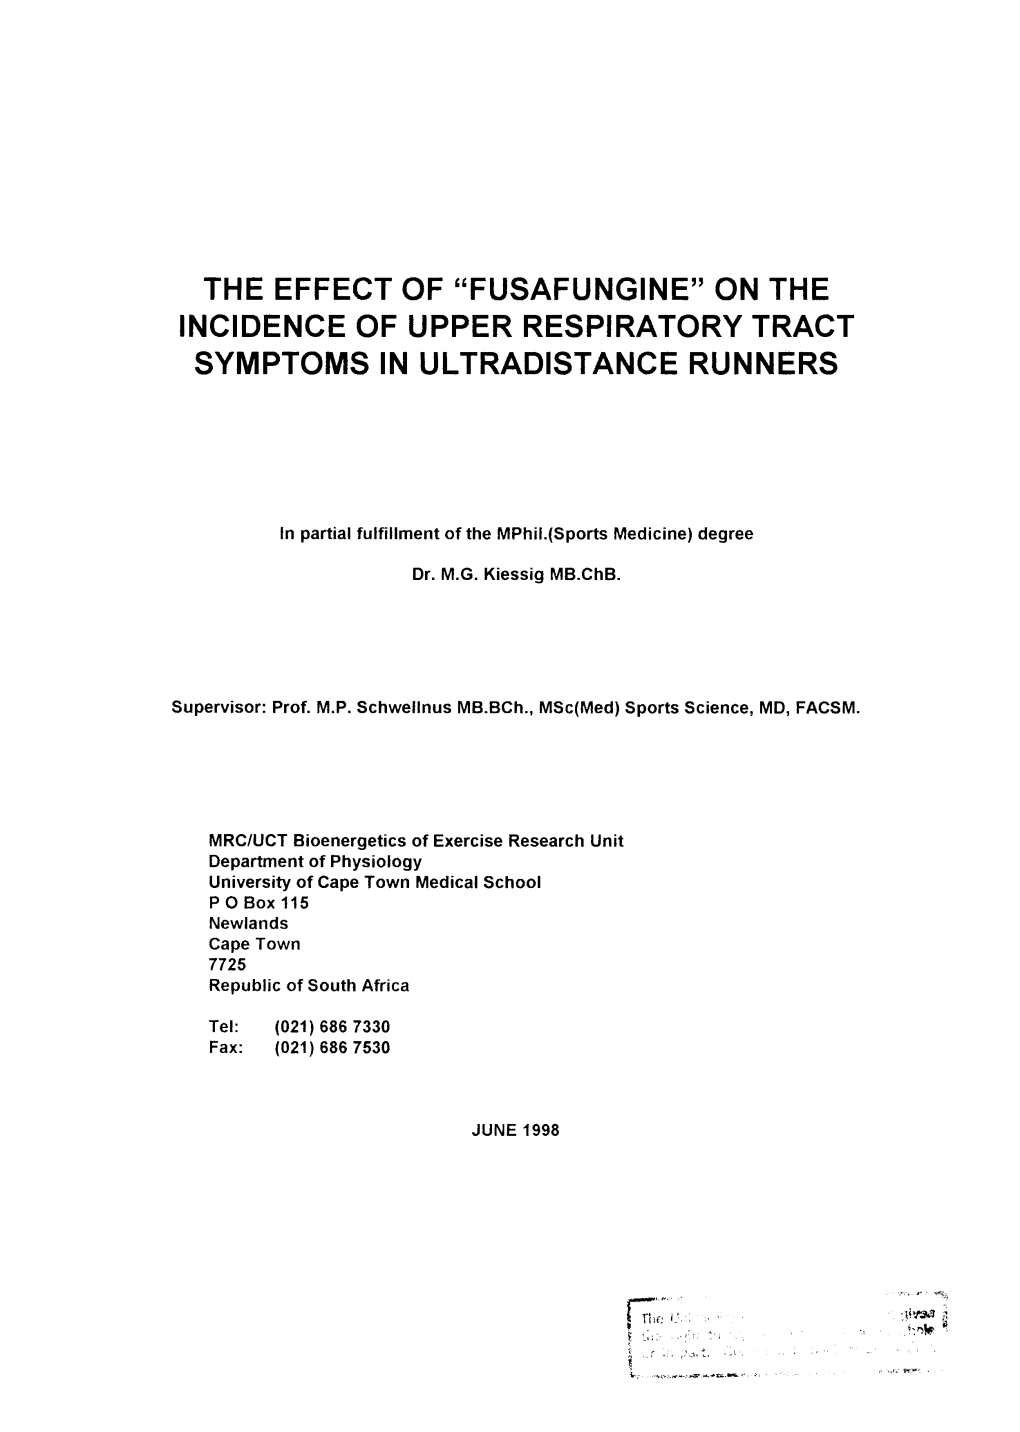 Fusafungine" on the Incidence of Upper Respiratory Tract Symptoms in Ultradistance Runners